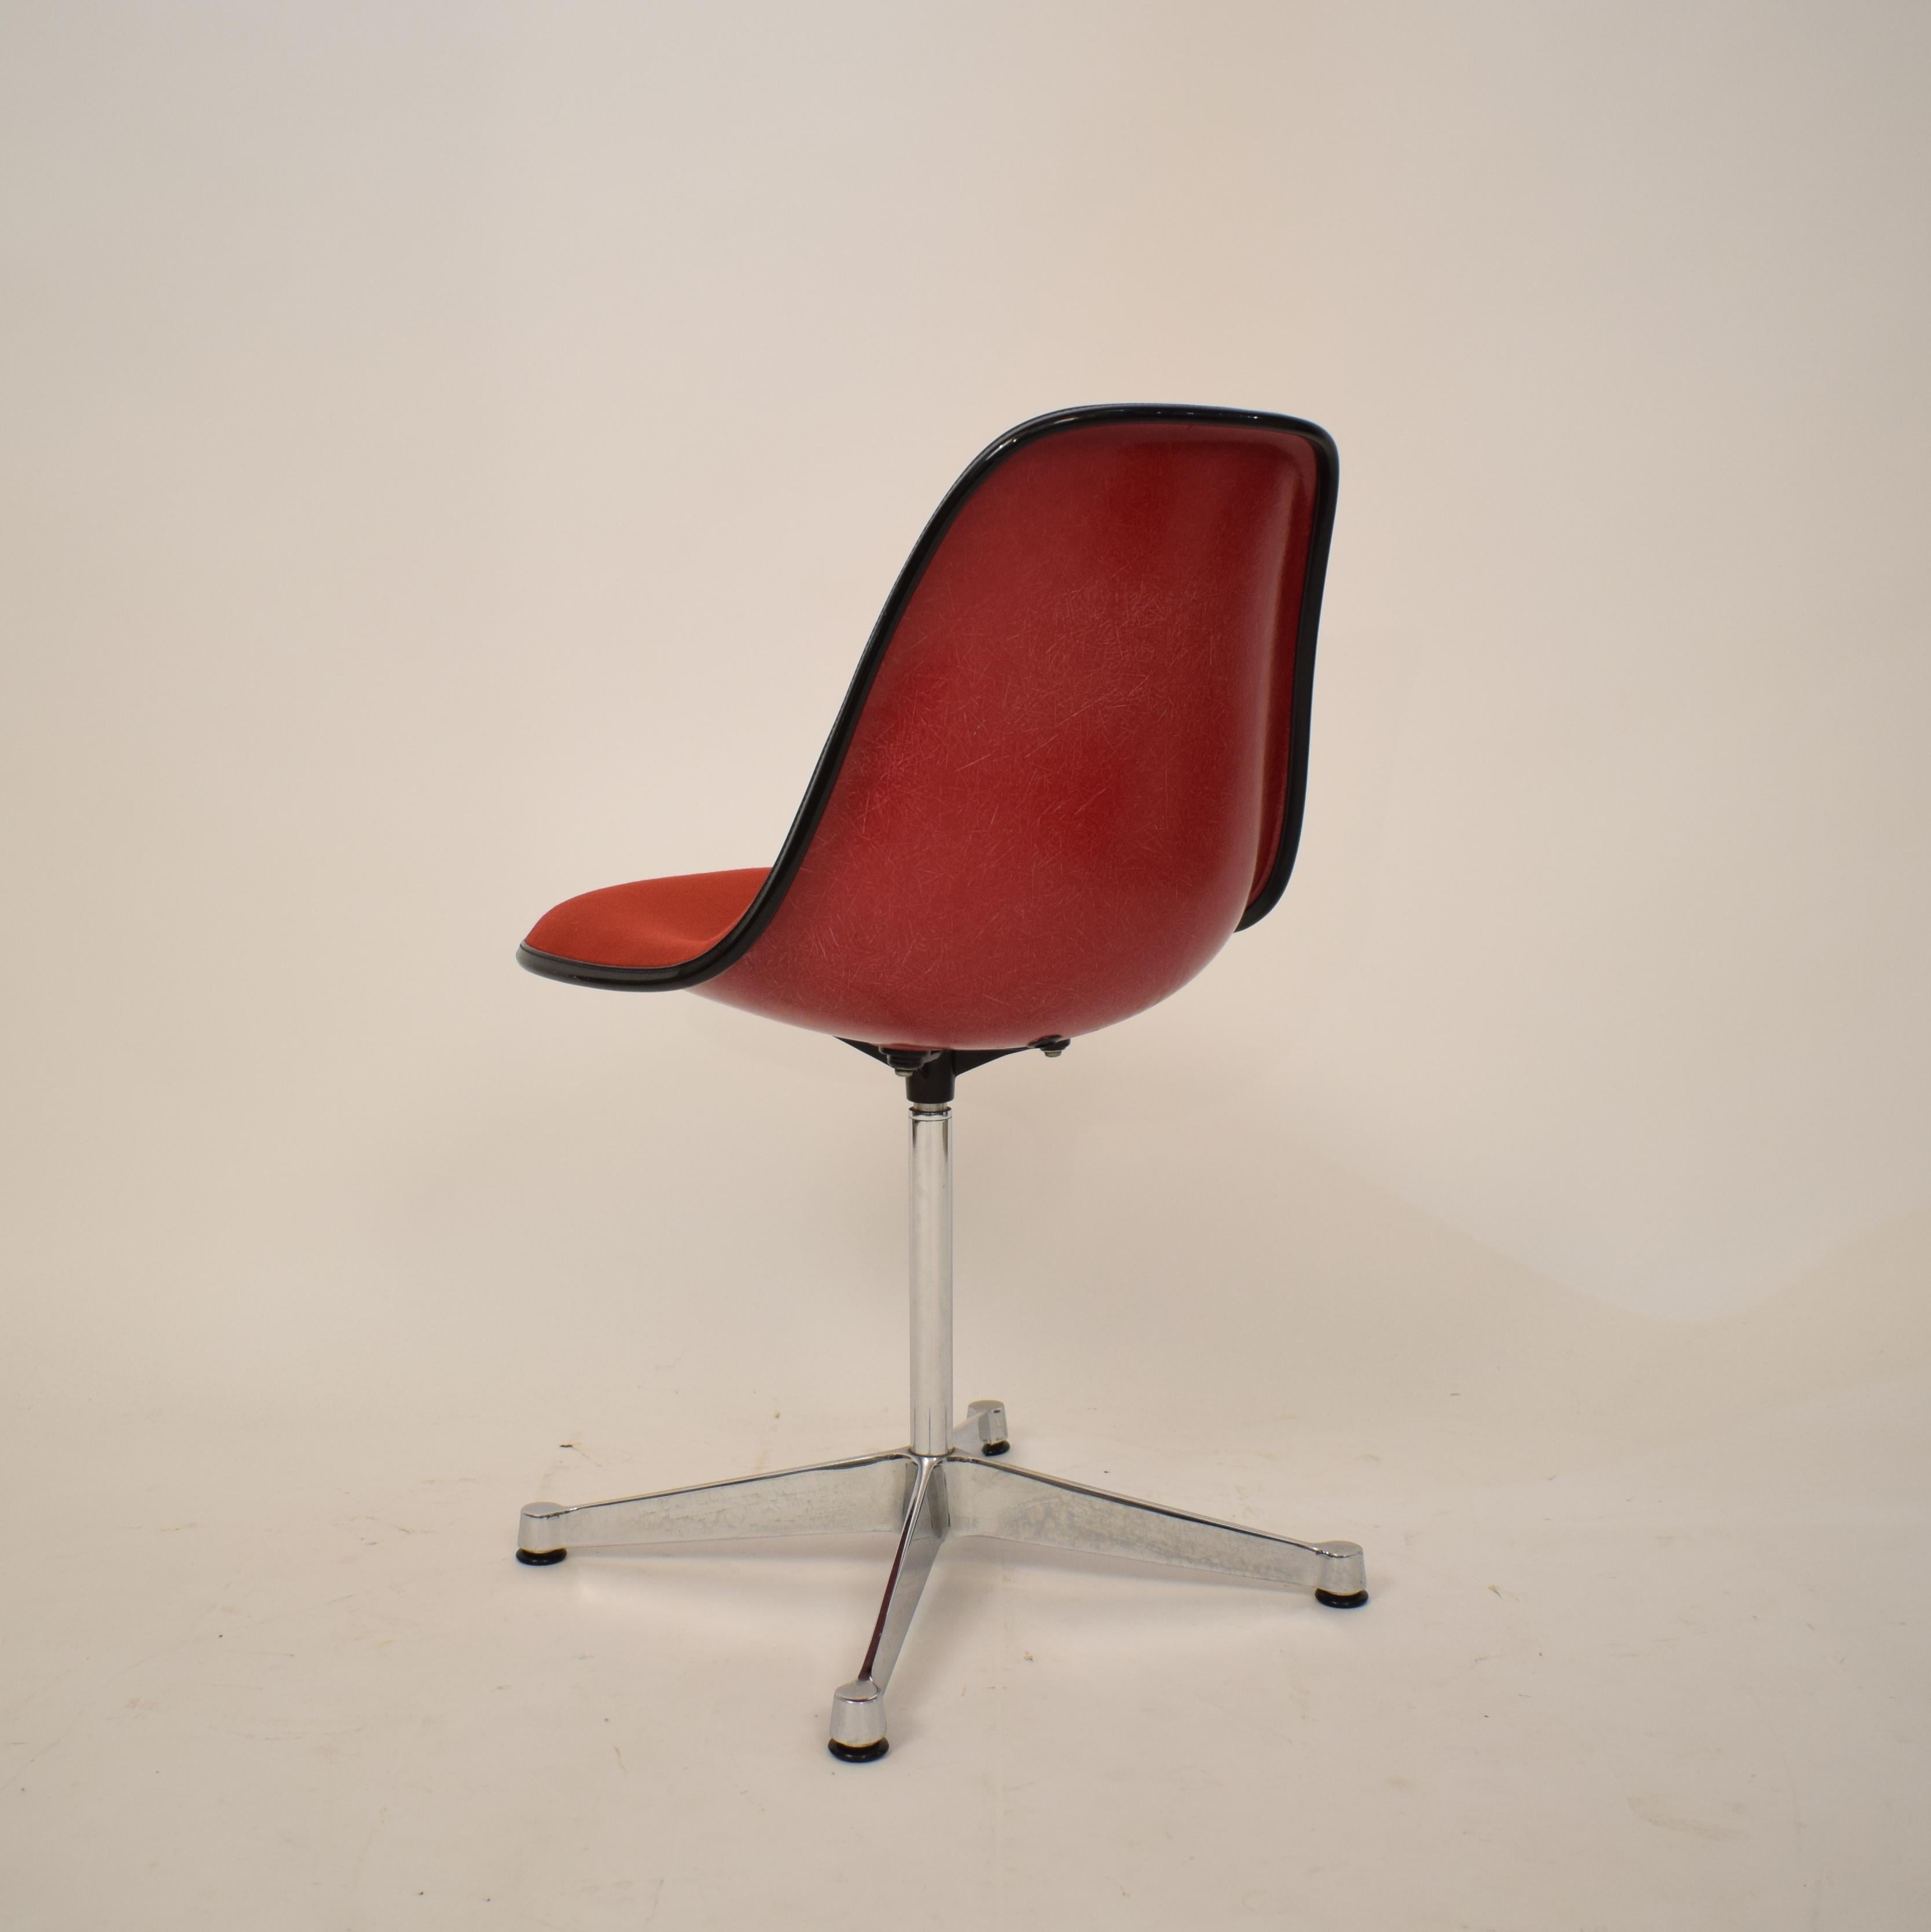 Metal Midcentury Padded Red Side /Pedestal Chair by Eames by Vitra for Herman Miller